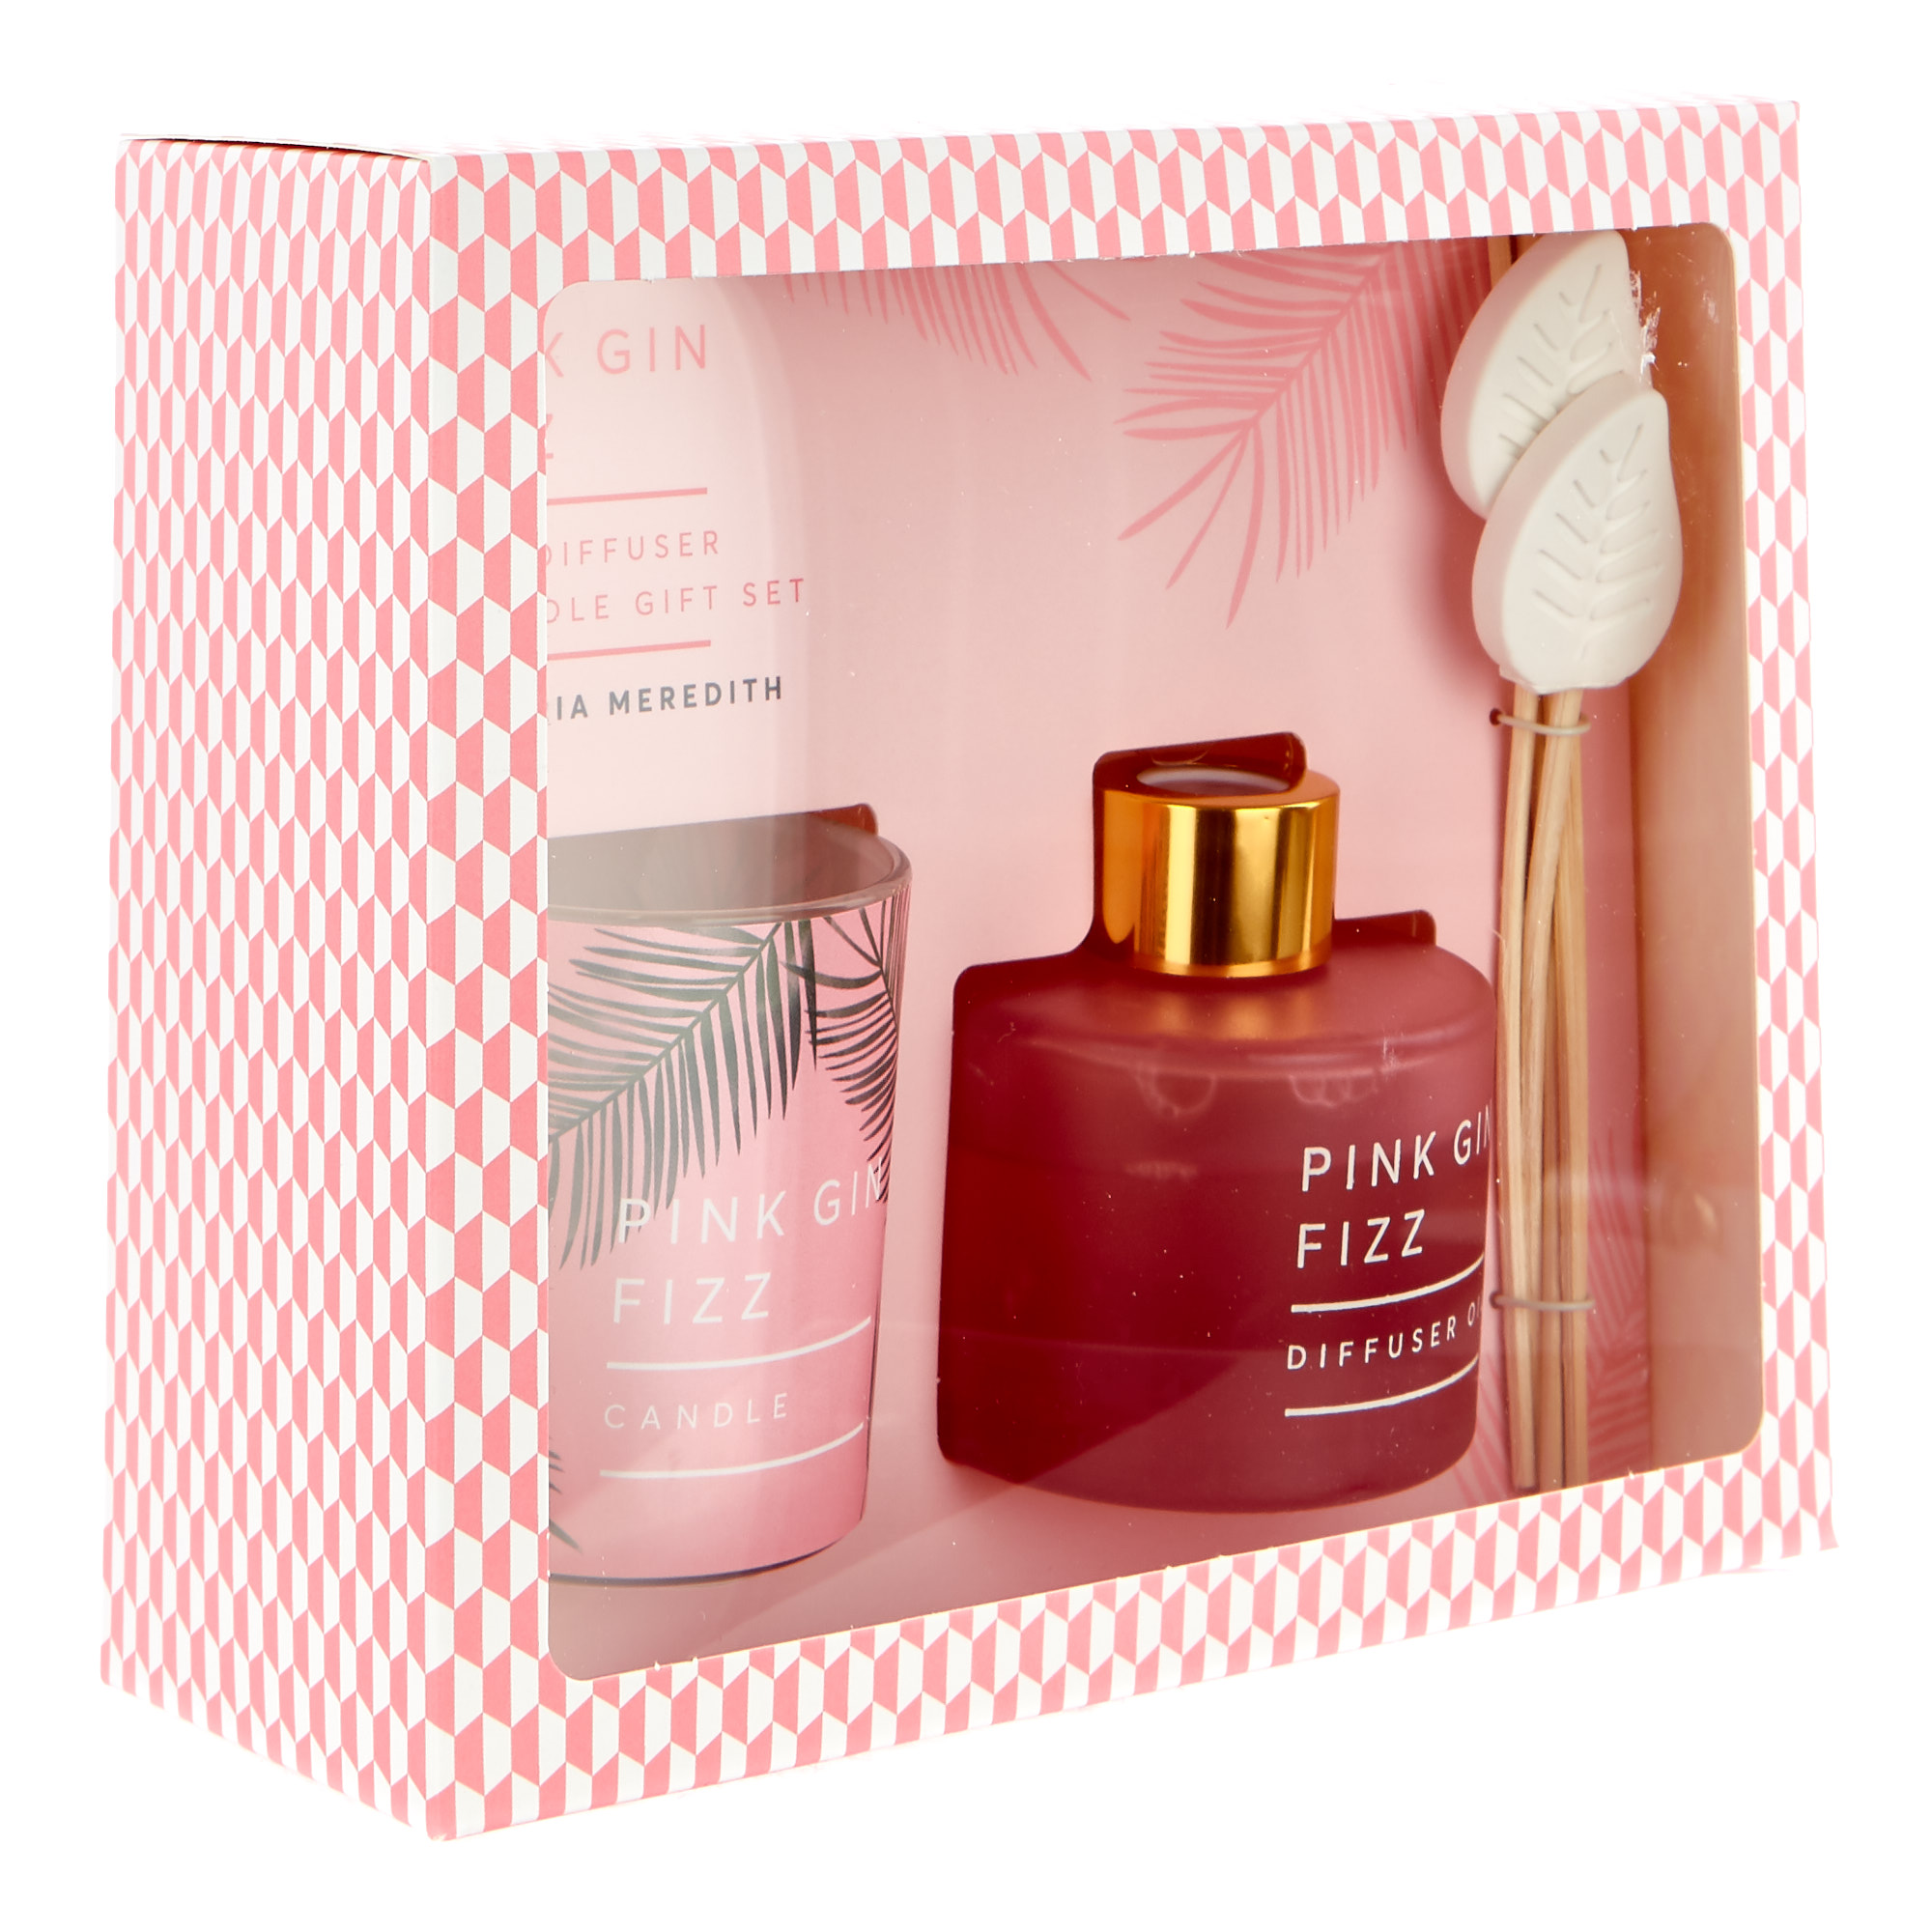 Victoria Meredith Pink Gin Fizz Candle & Diffuser Gift Set